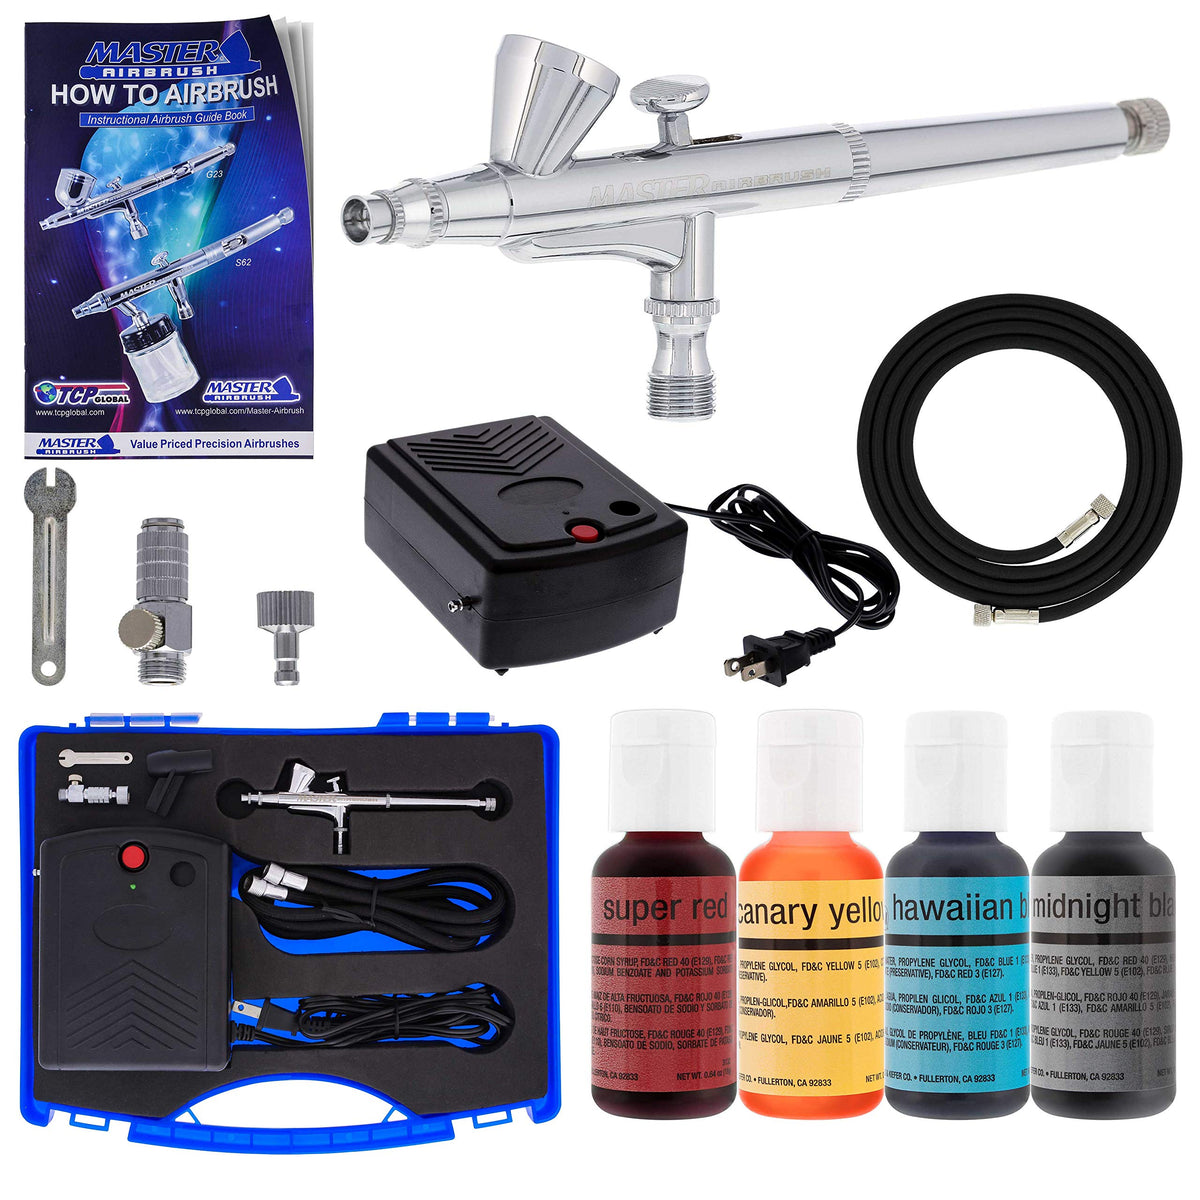 Bakery Airbrush Cake Kit with 3 Airbrushes, Compressor, 2 Air Hoses & 12  Color Chefmaster Food Coloring Set.7 fl Ounce